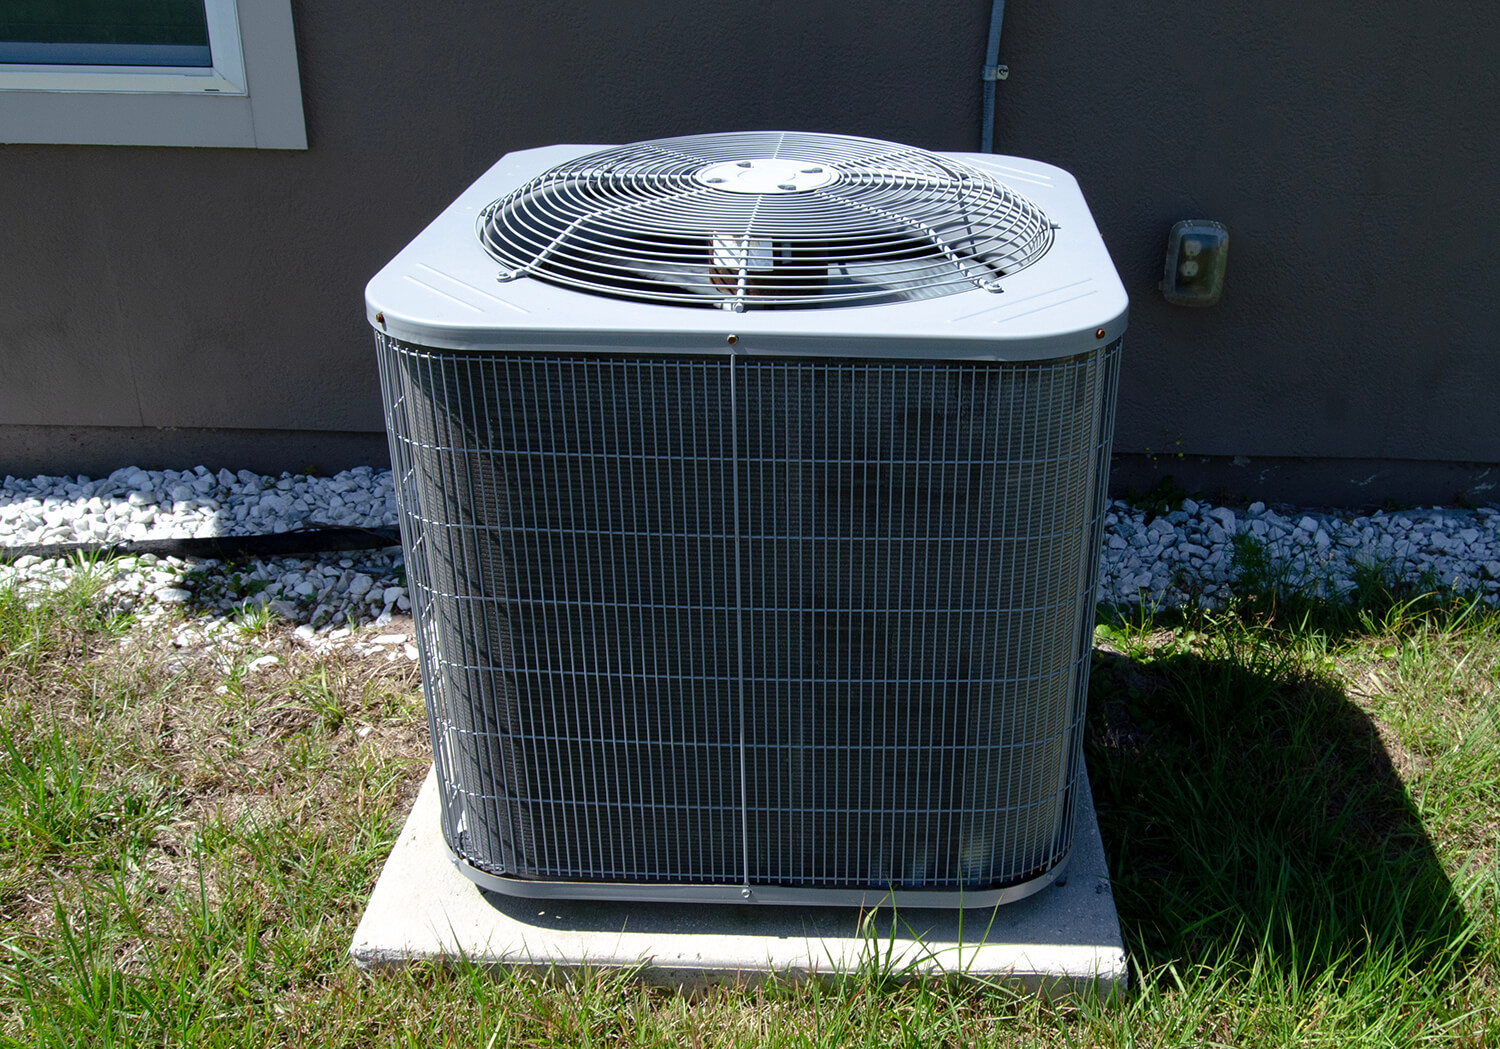 Not being able to go out due to a condenser complication in the HVAC system